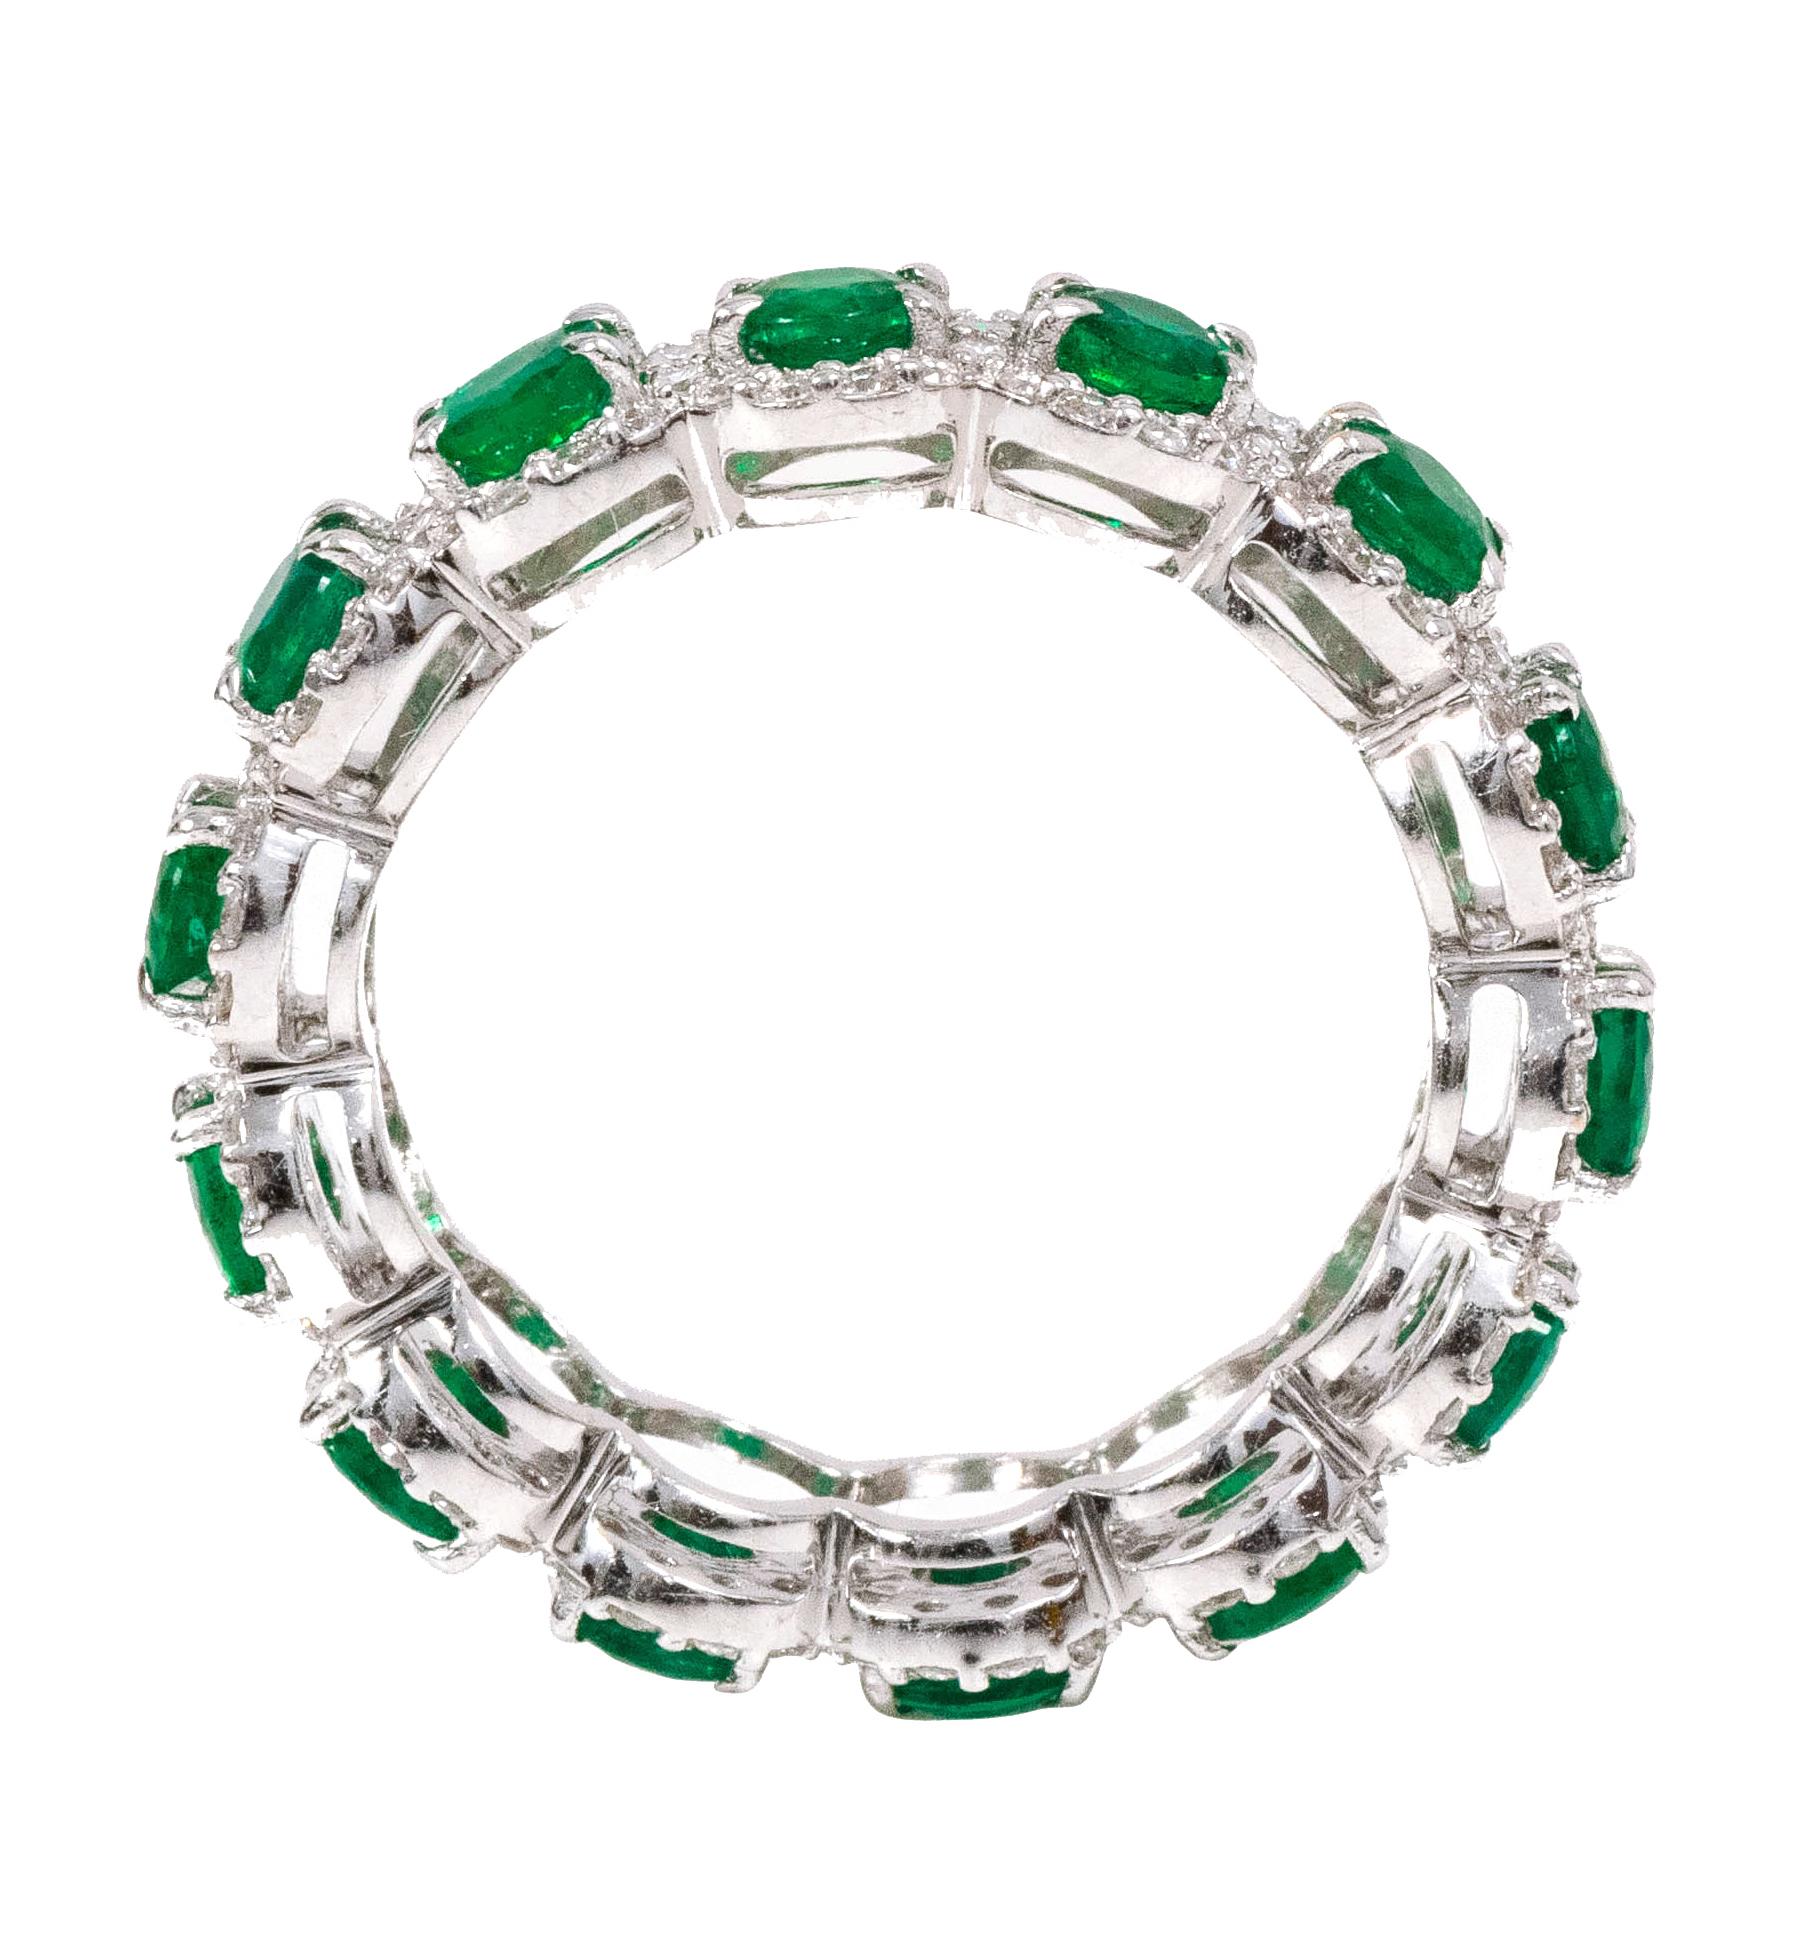 18 Karat White Gold 3.39 Carat Emerald and Diamond Cluster Eternity Band Ring For Sale 1